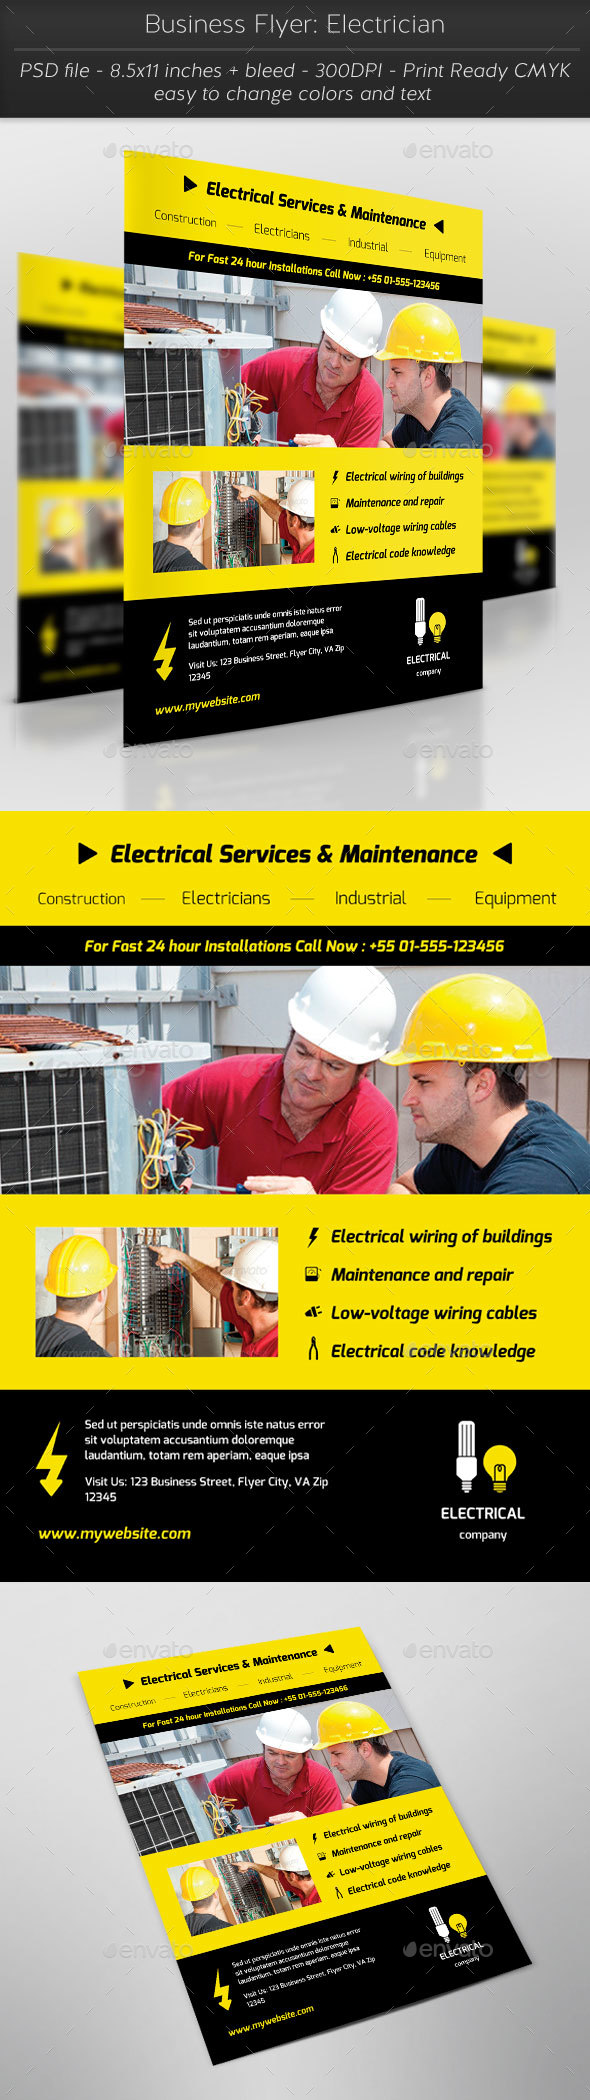 Business Flyer: Electrician